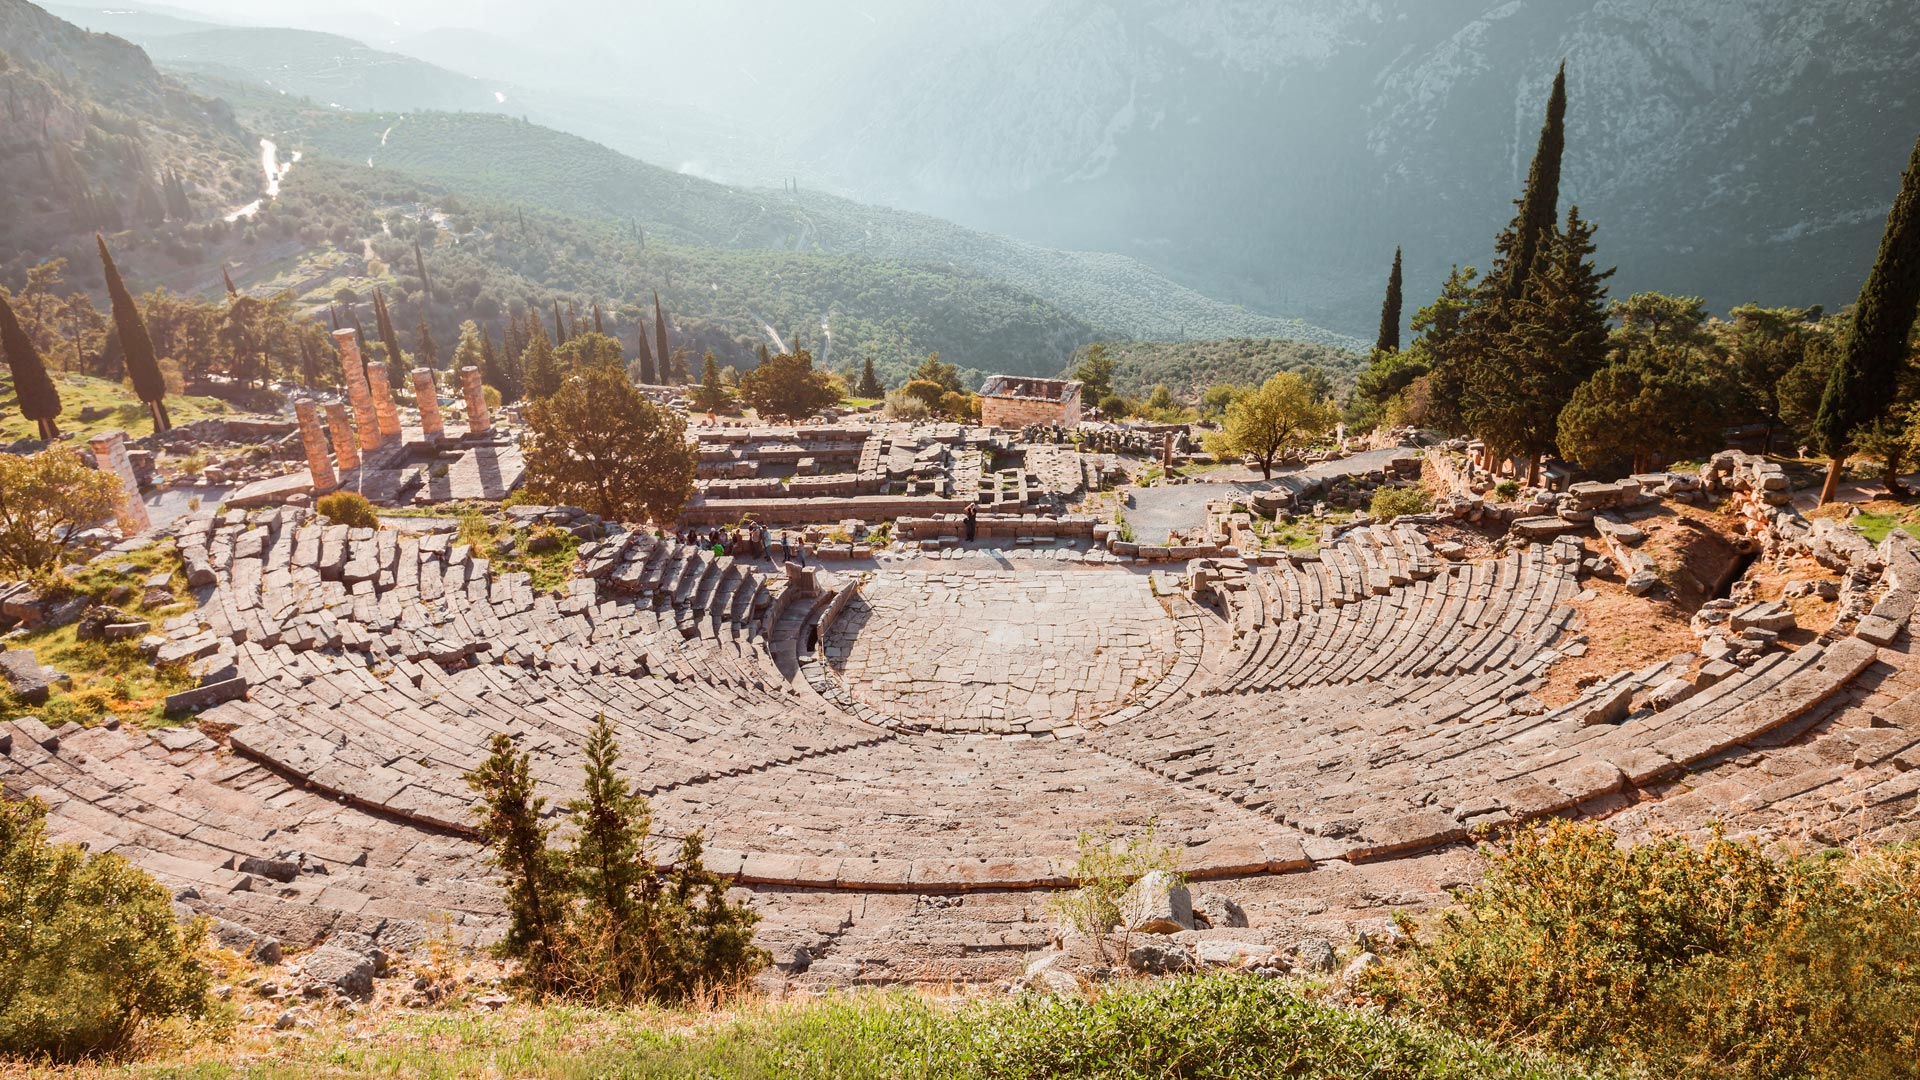 Located above the Temple of Apollo, the Ancient Theatre looks over the entire sanctuary and a valley of olive trees